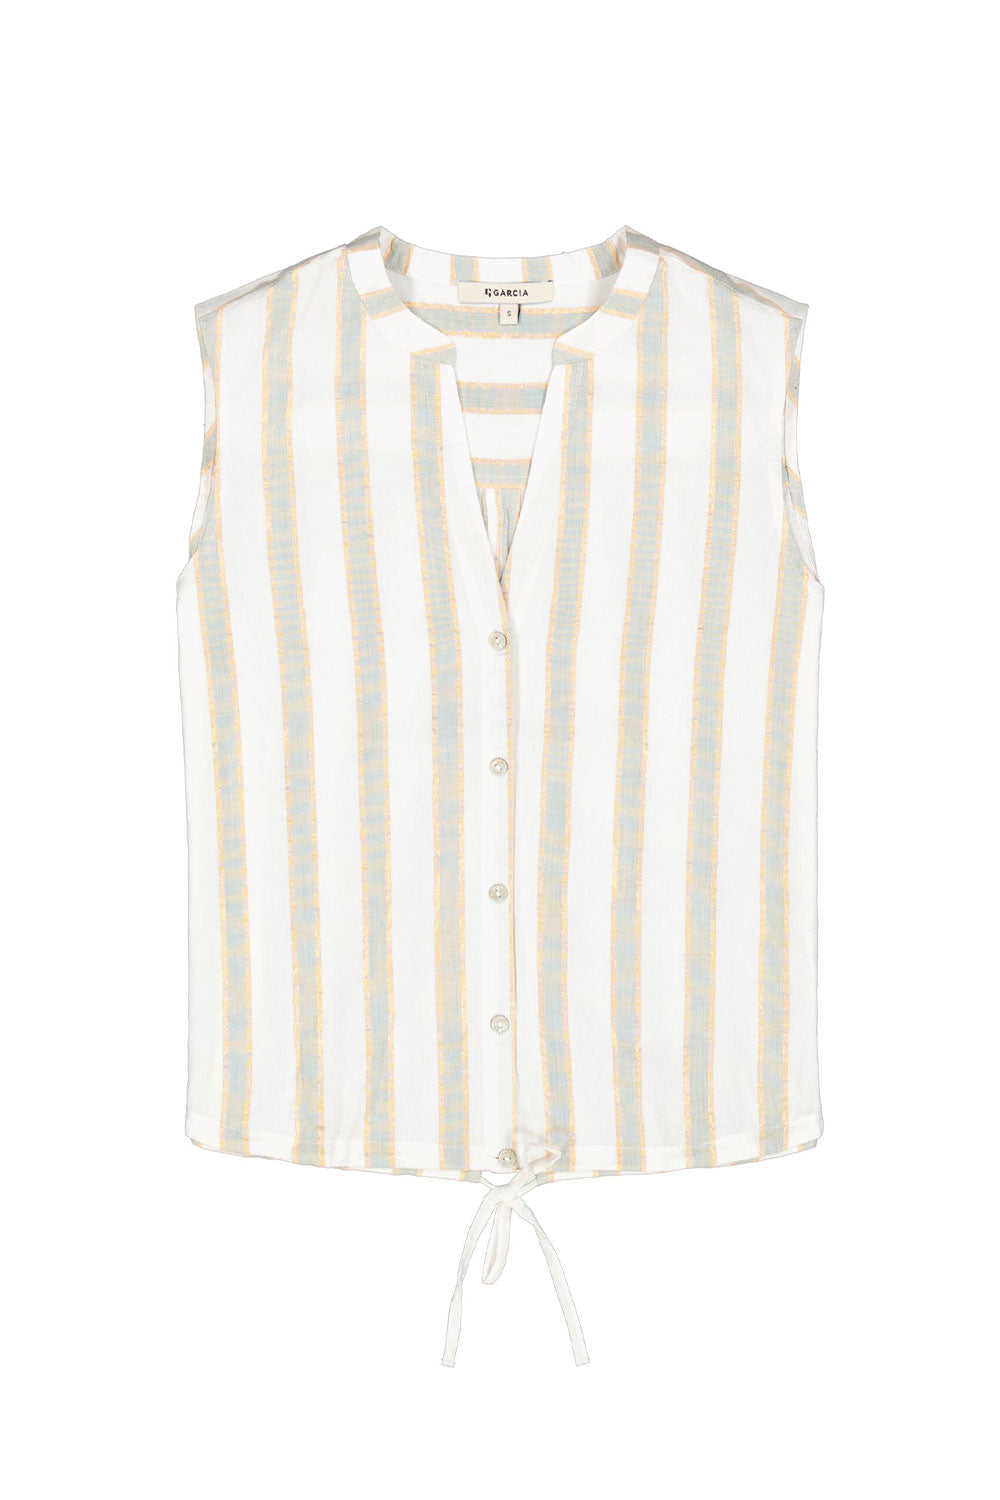 Garcia (Q40033) Women's Sleeveless Button Up Blouse with Tie Waist and Split V-neck in Cream, Pastel Green and Golden Lurex Stripes